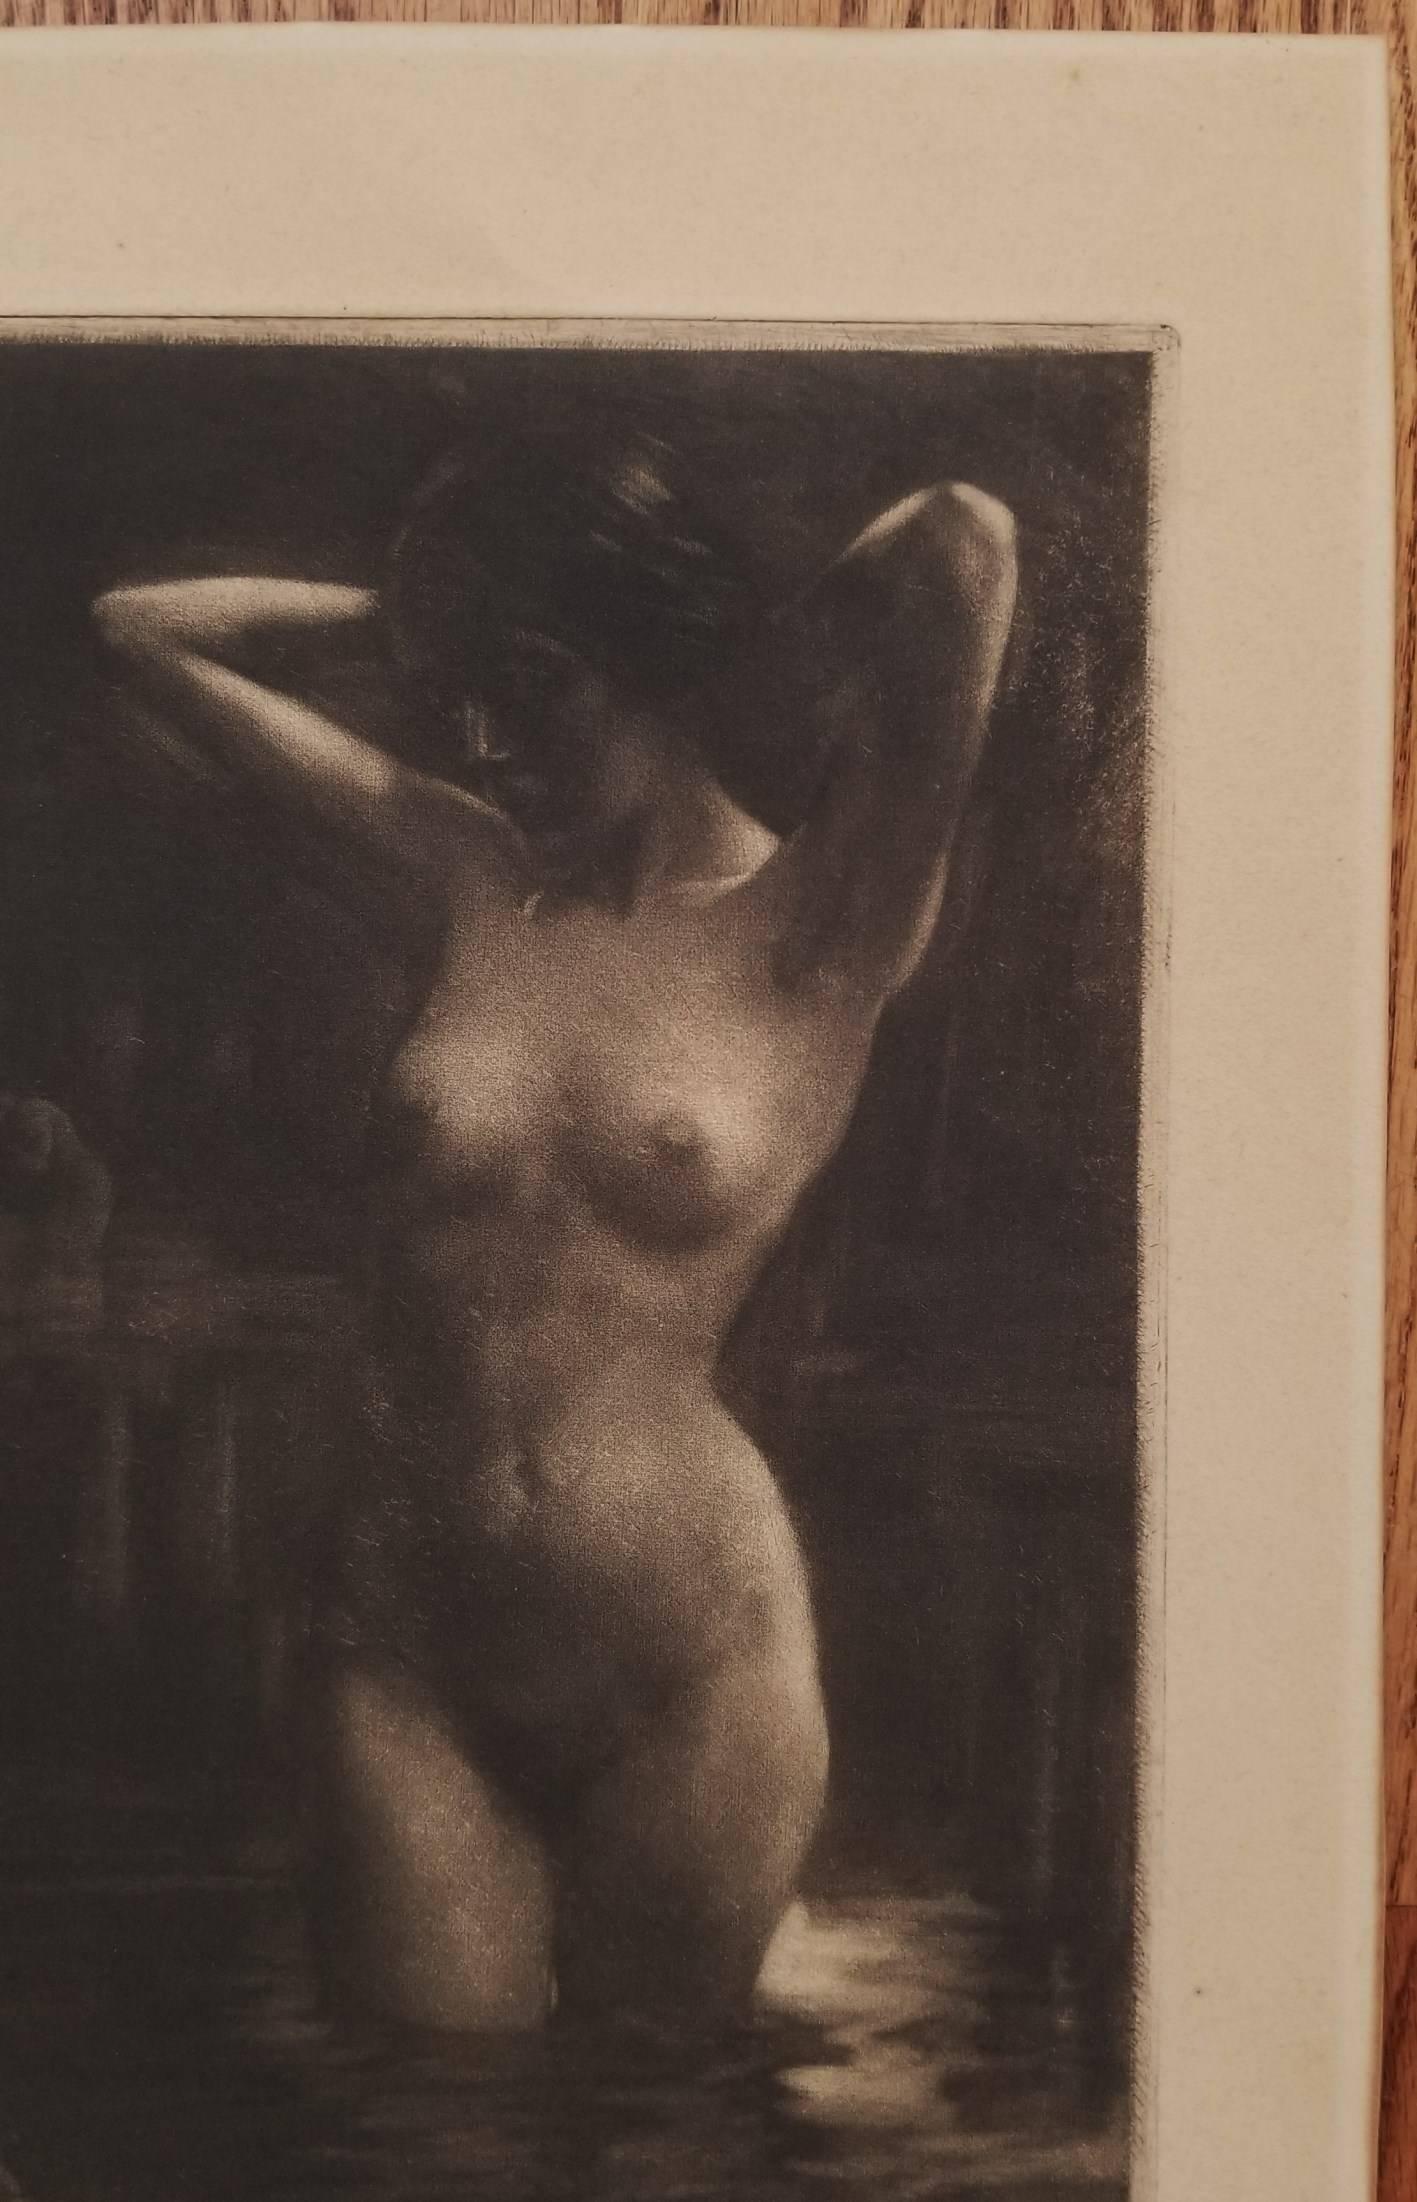 An original signed mezzotint etching on heavy wove paper by German artist Georg Jahn (1869-1940) titled 